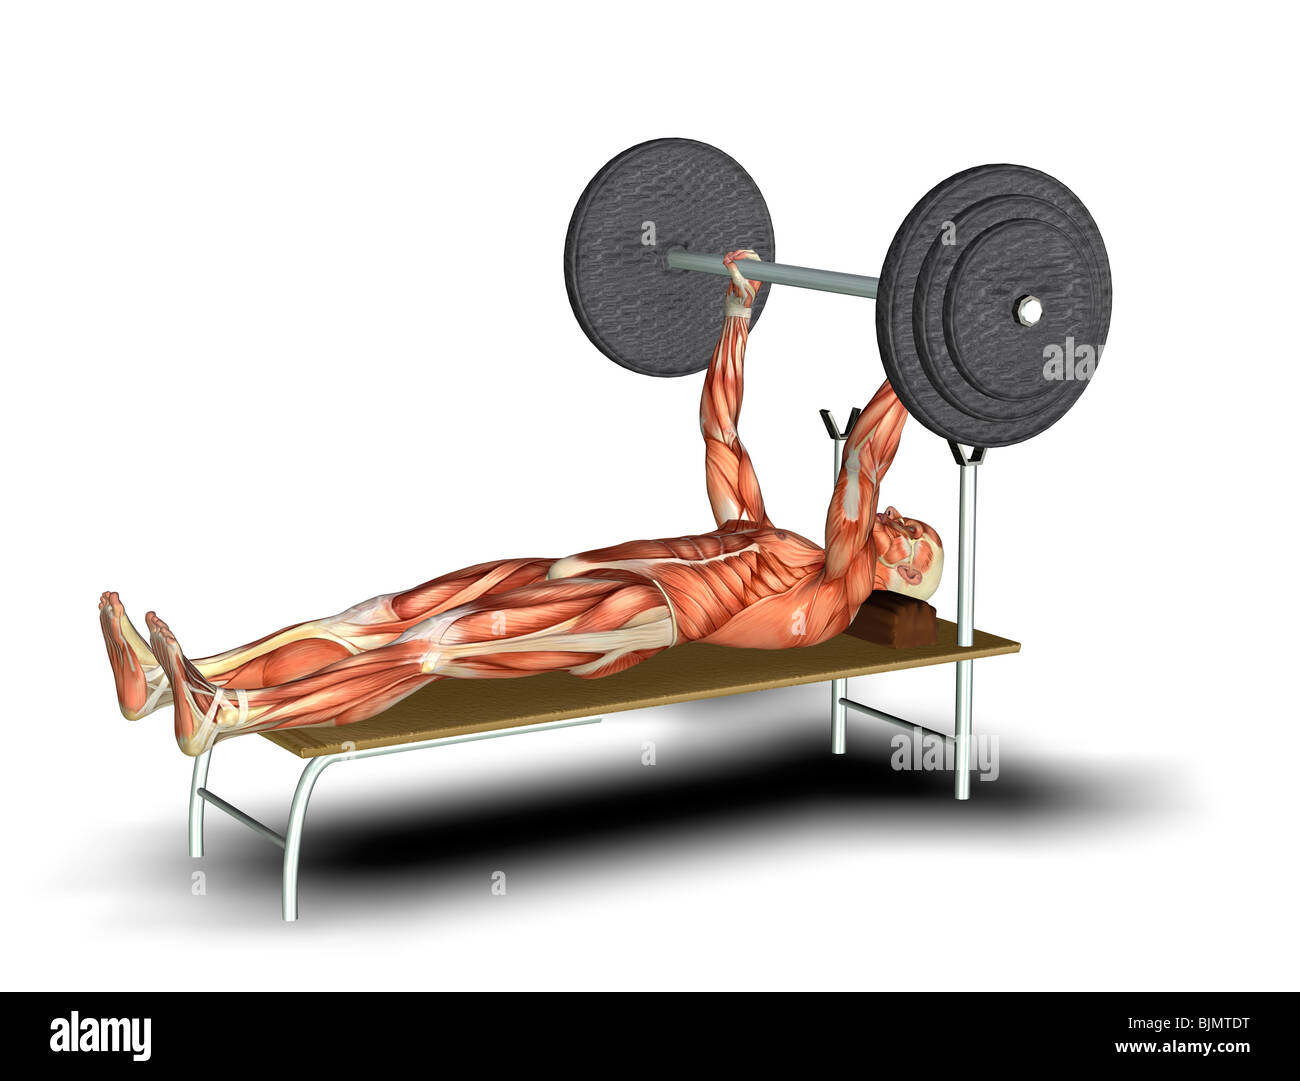 muscle man as weightlifter Stock Photo